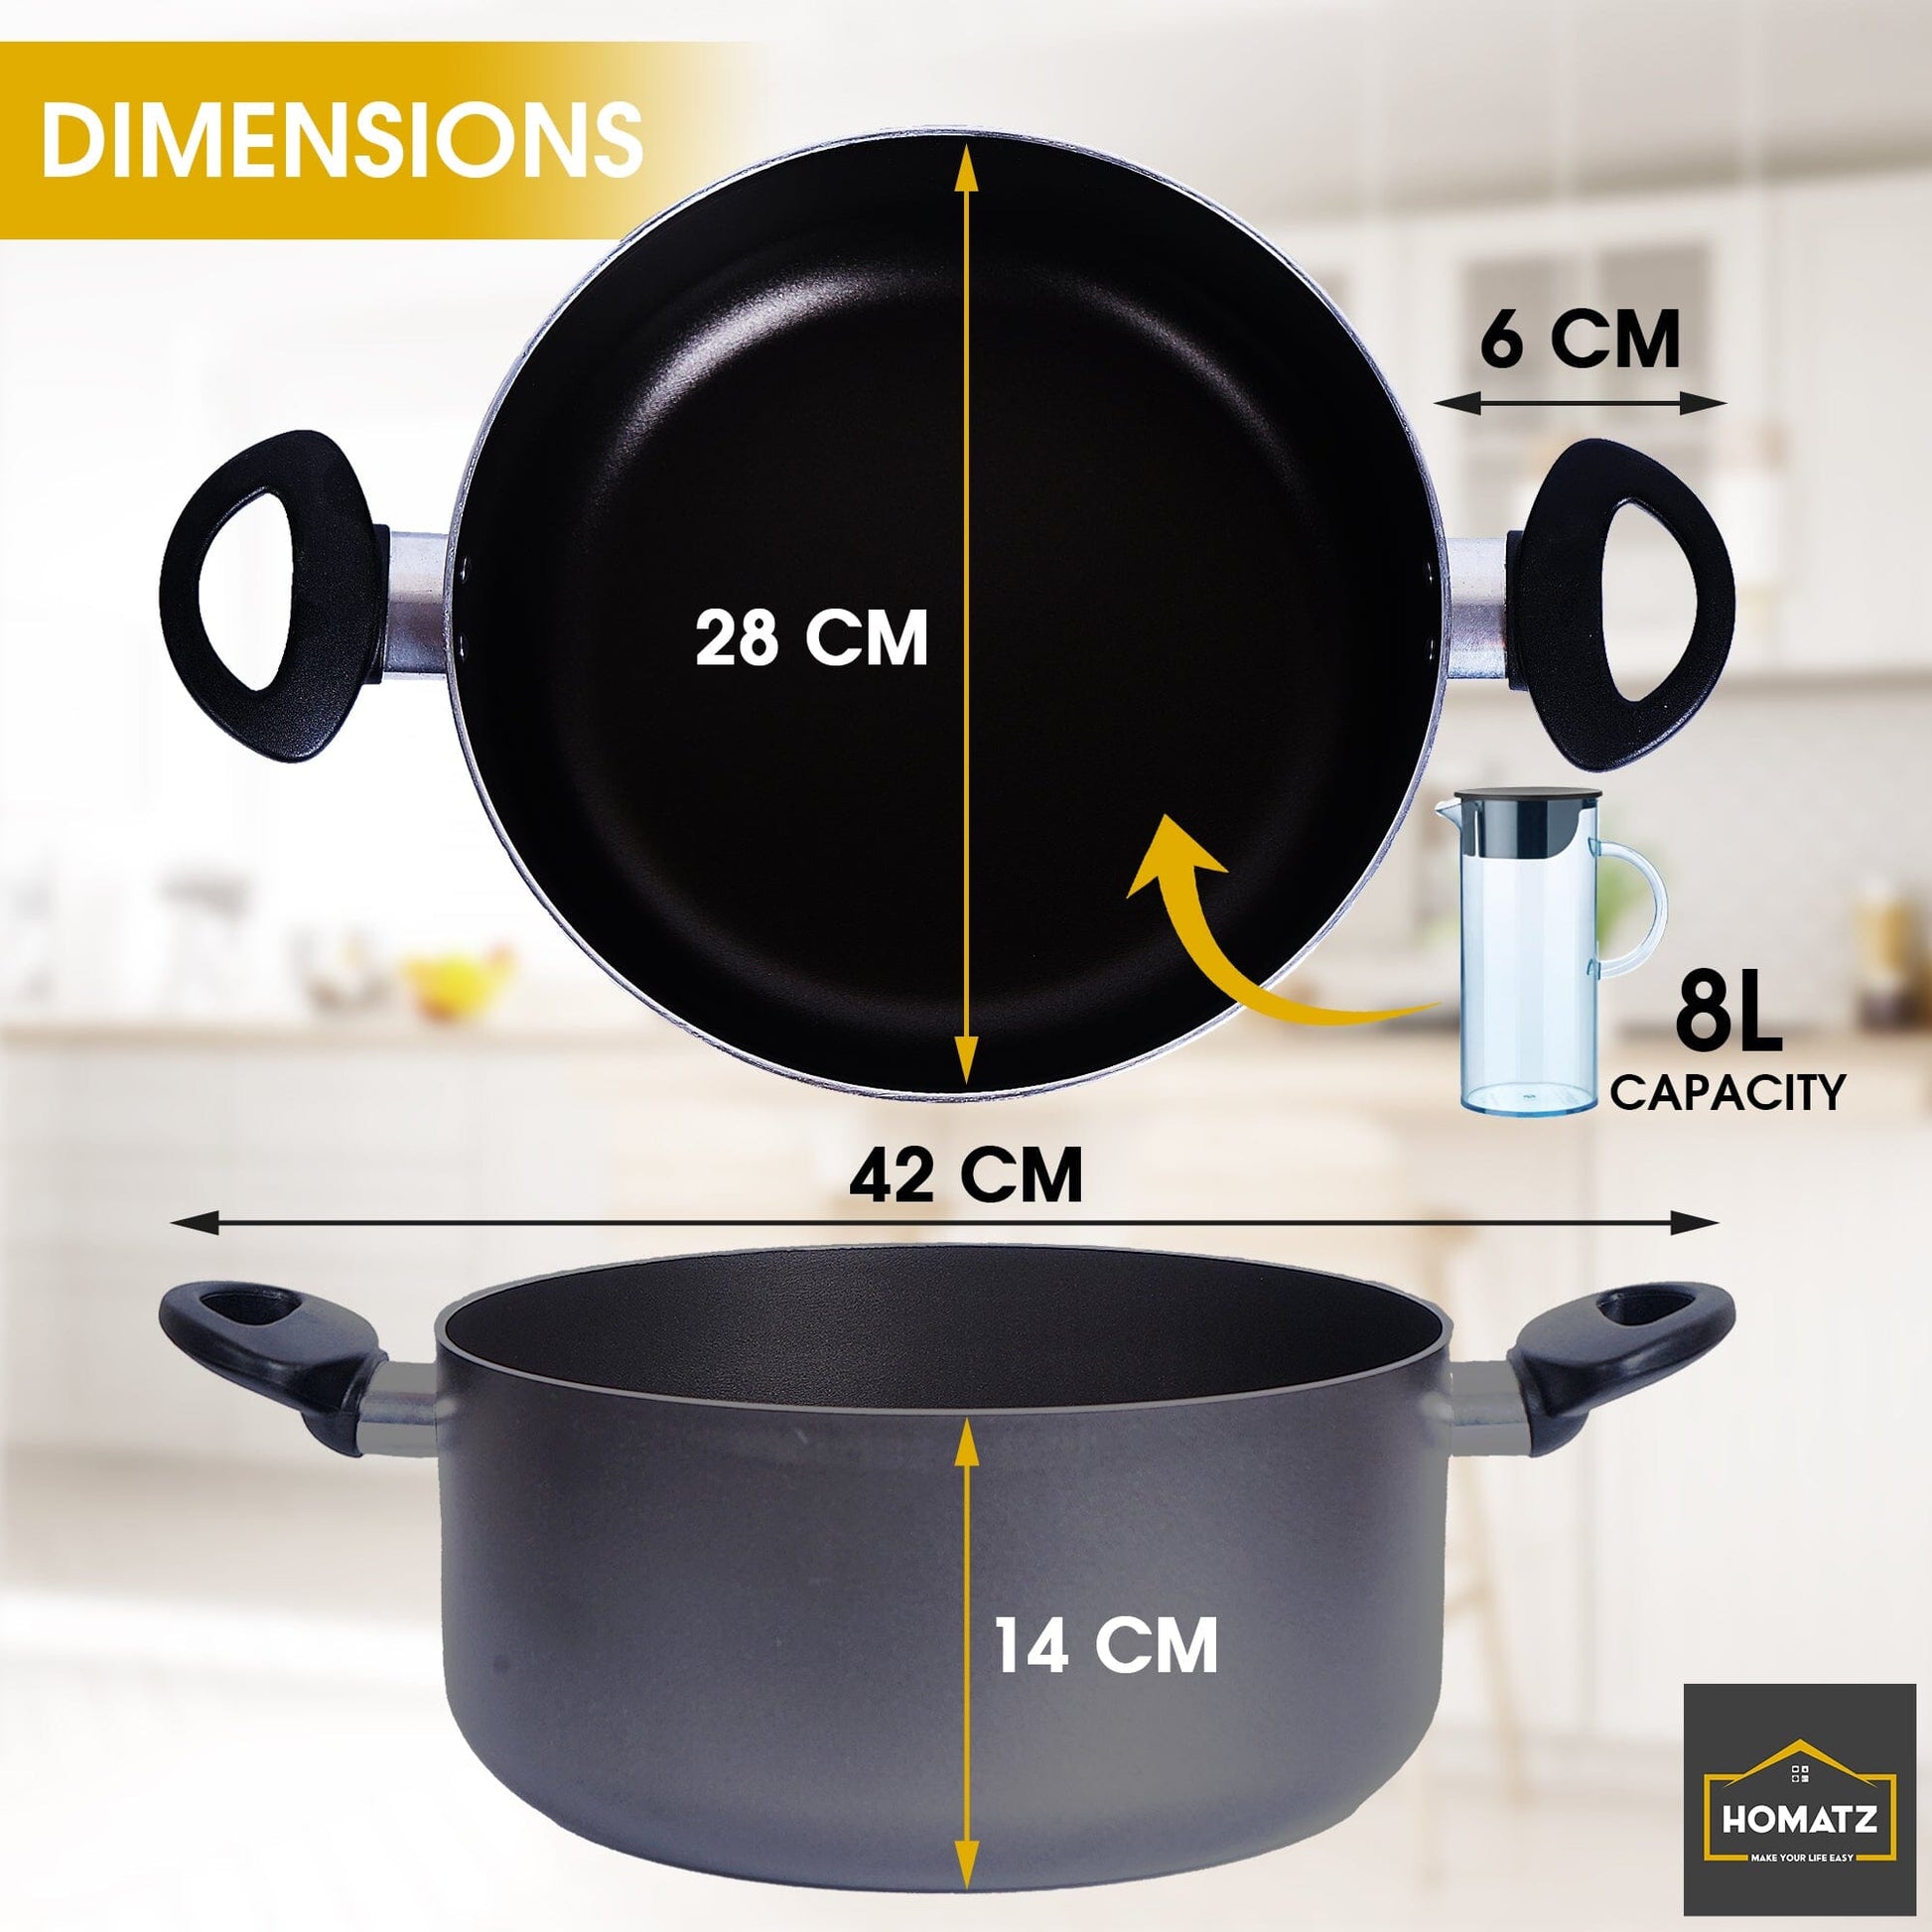 Stock Pot Non-Stick Kitchen Cooking Pot with Glass Lid and Silicon Trivet Mat - Induction Base Aluminum Pot Cooking Homatz 28cm Grey 